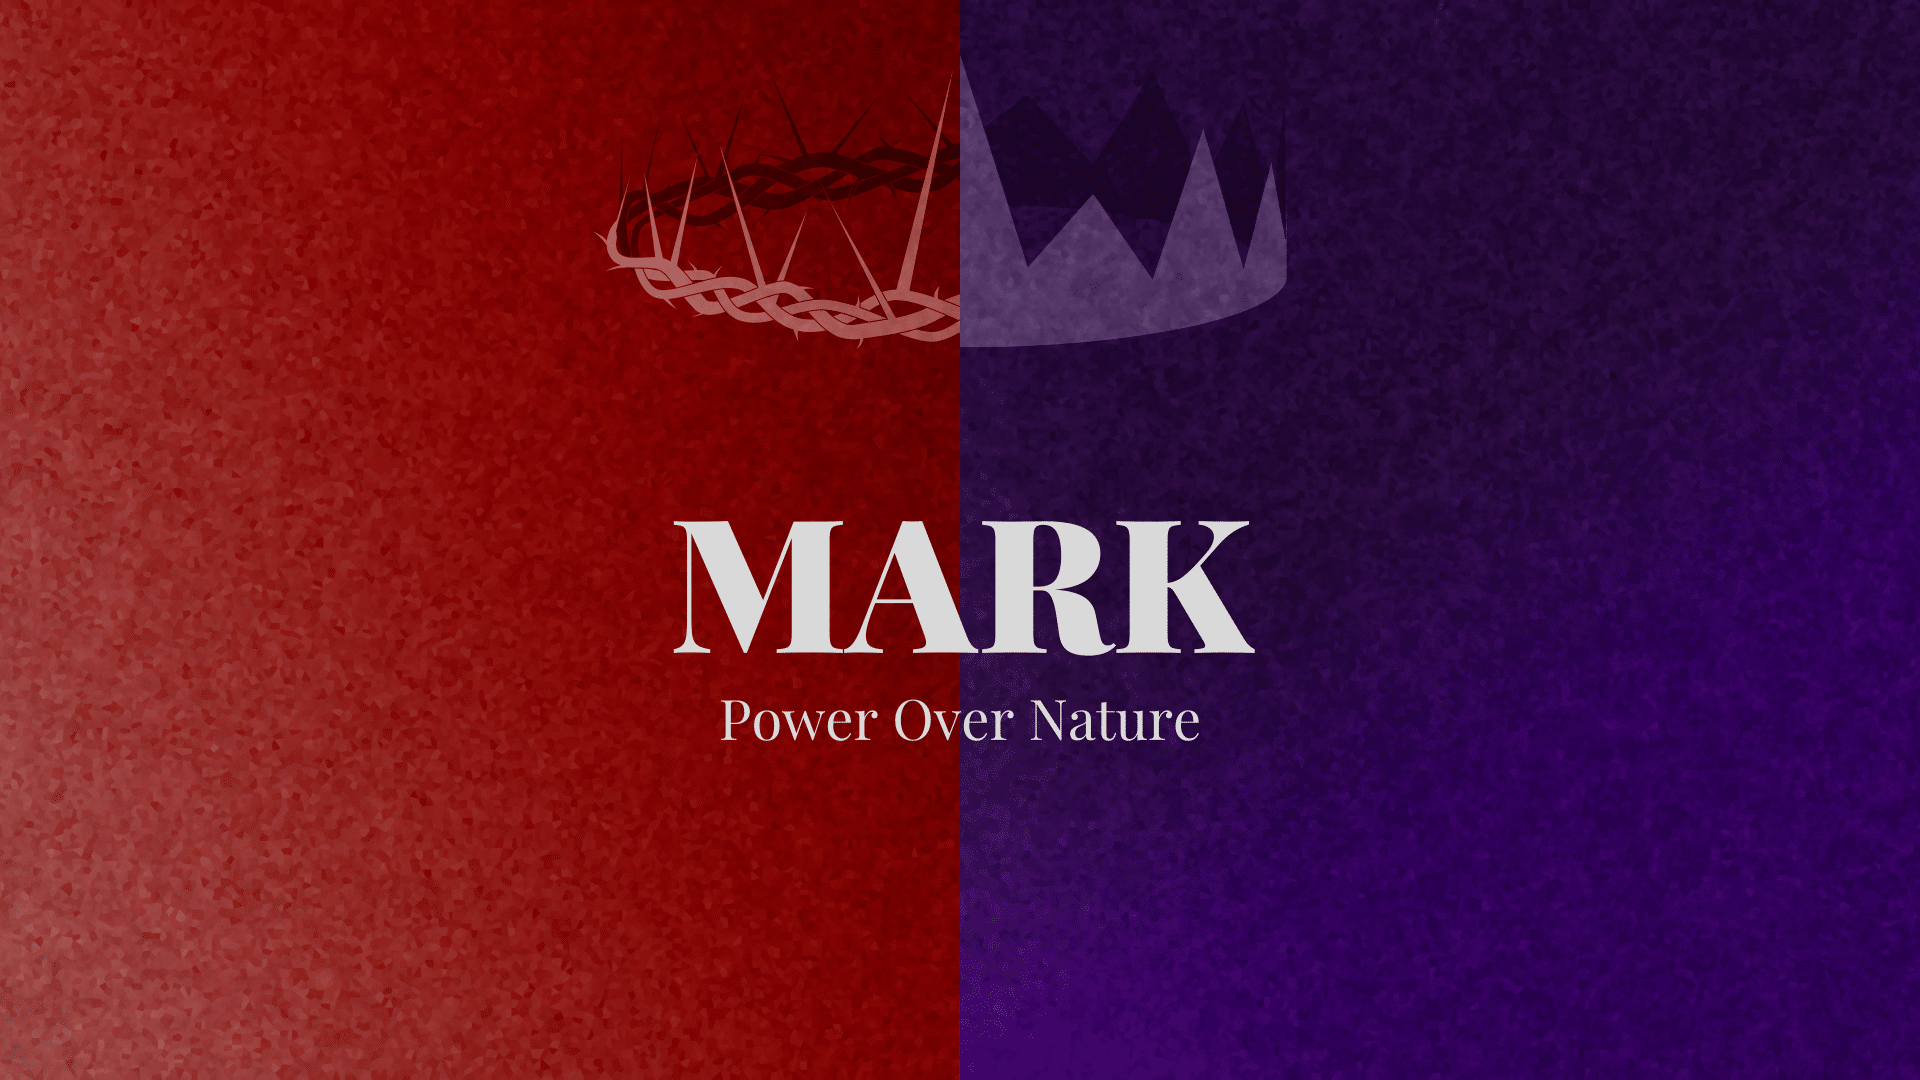 Mark: Power Over Nature